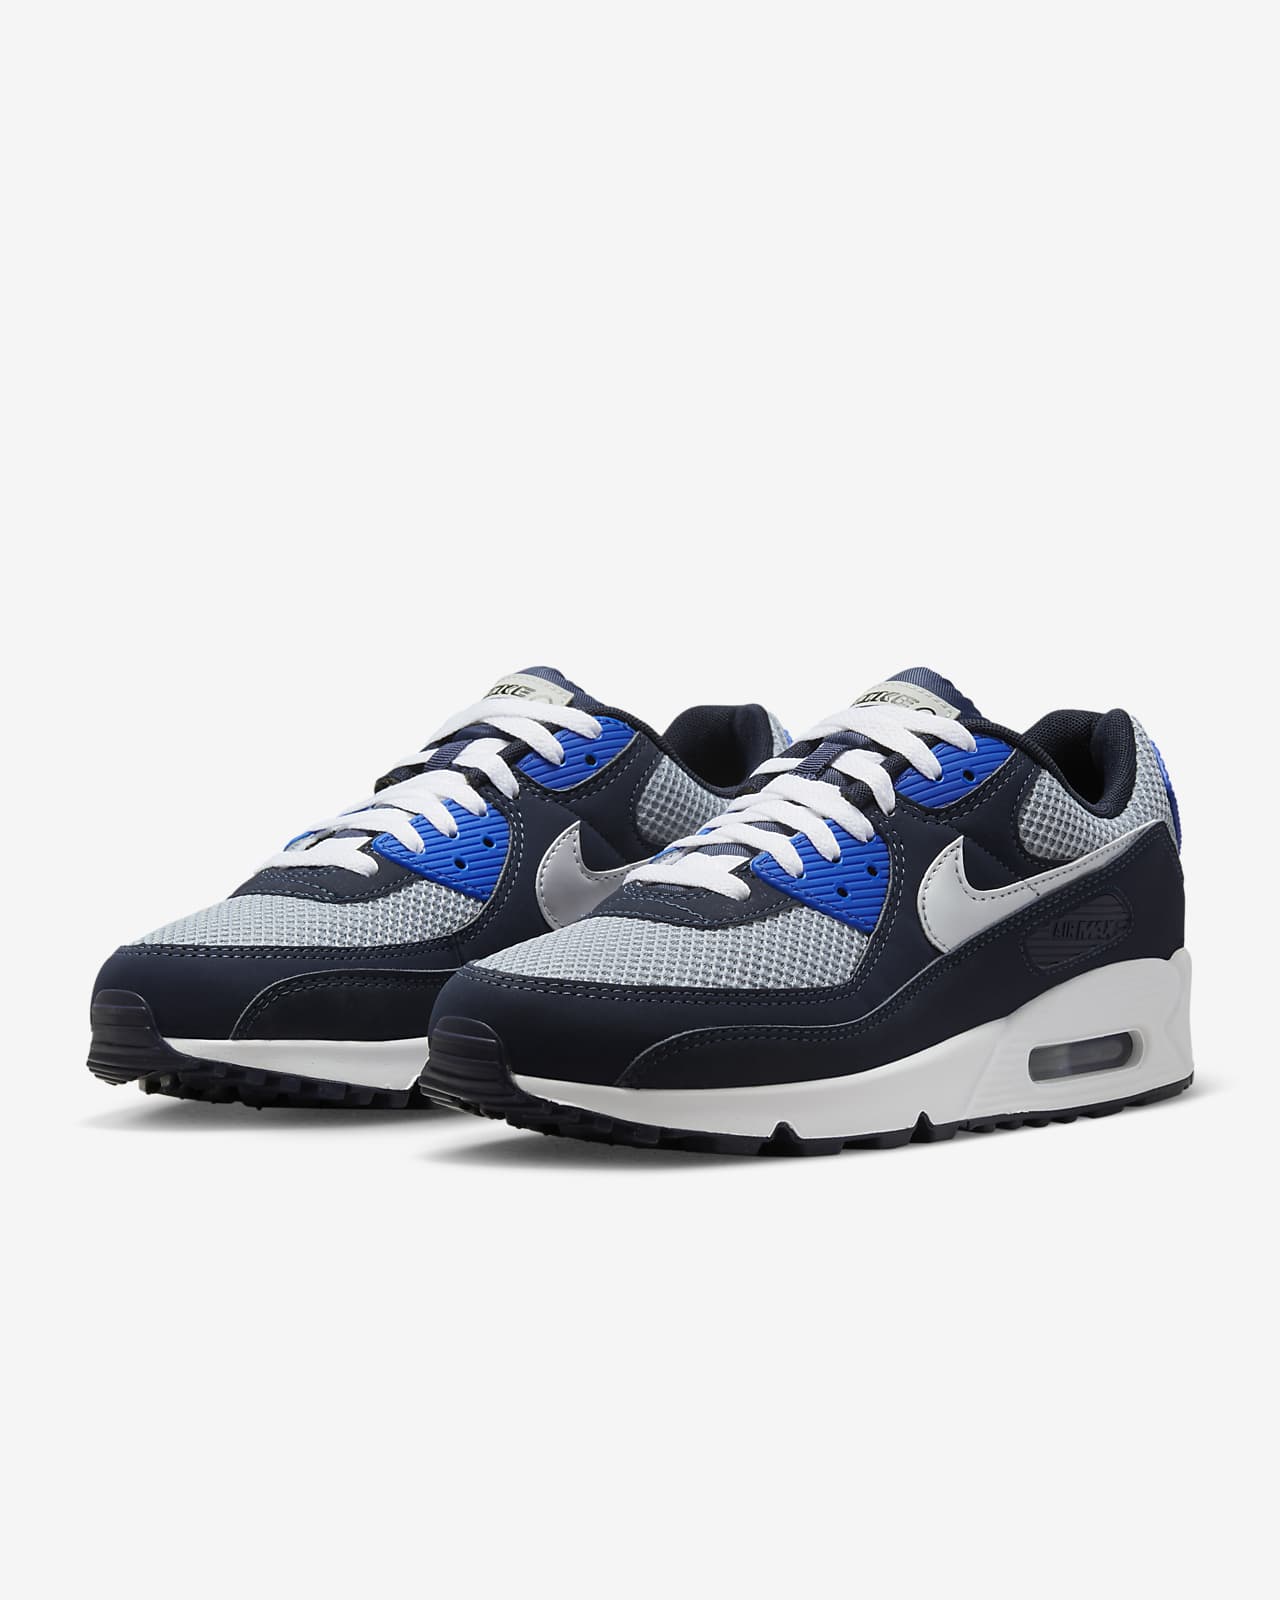 Nike Max 90 Men's Shoes. ID